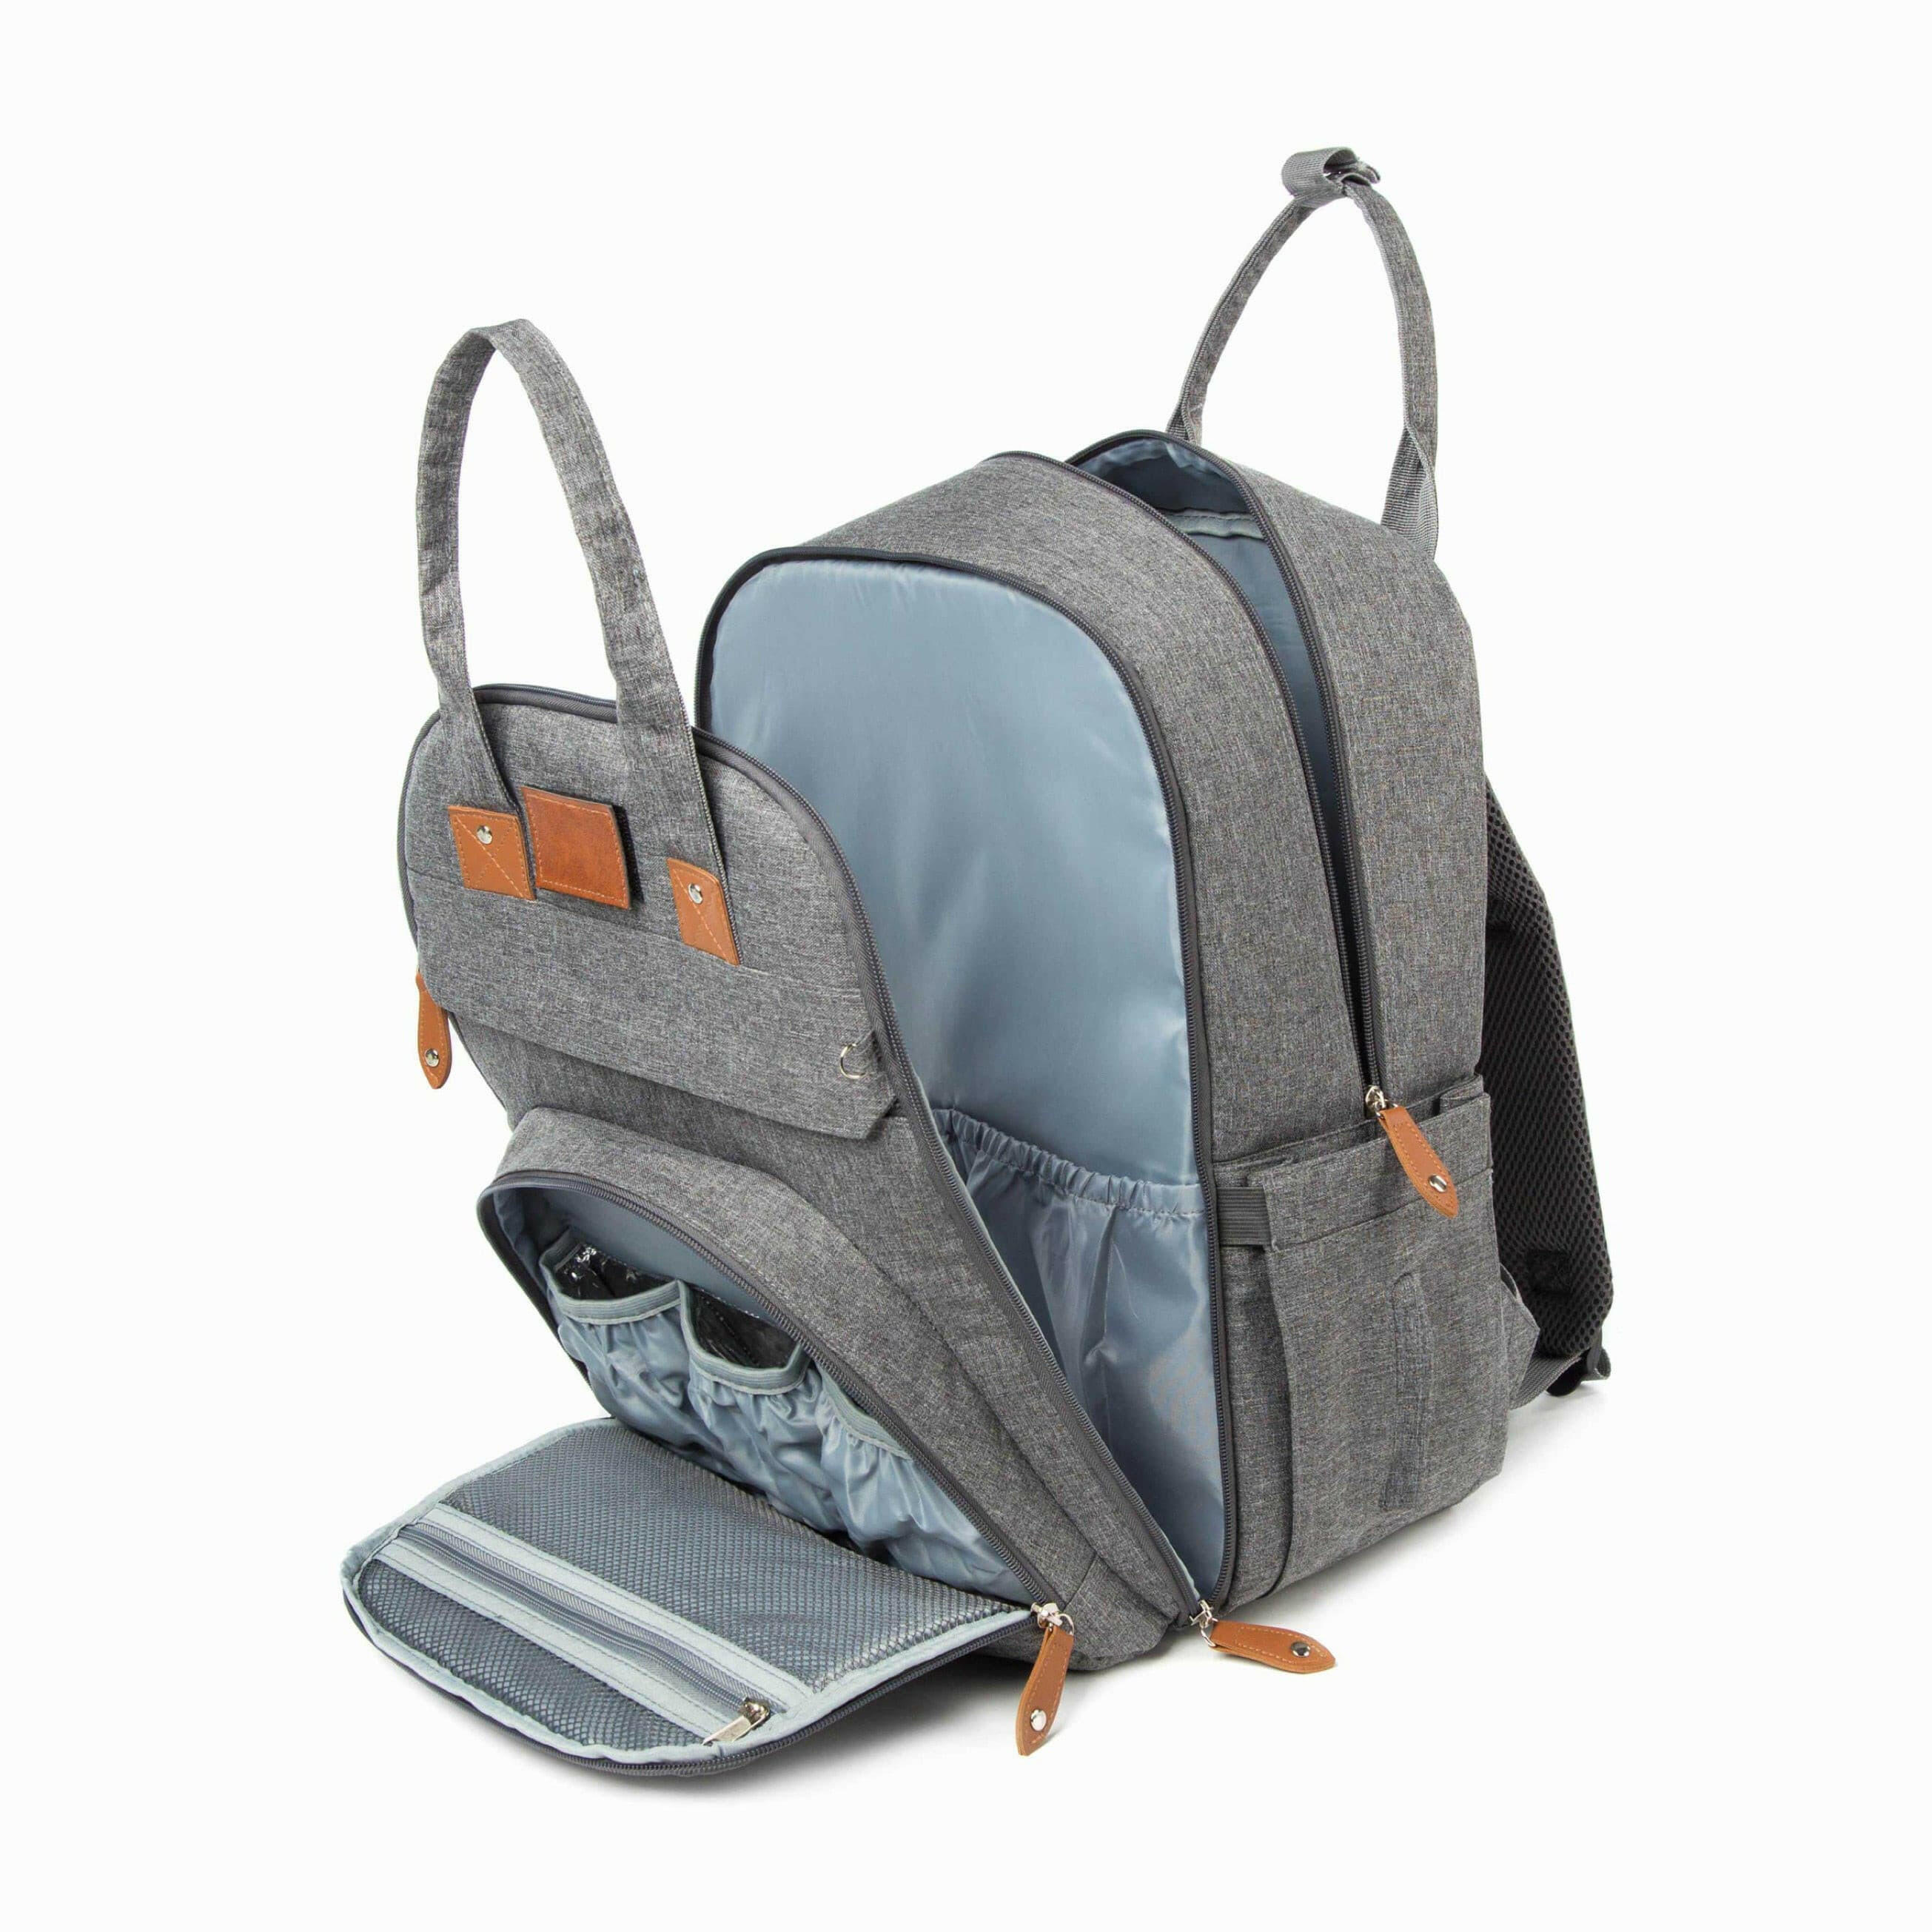 Baby Diaper bag backpack with changing pad.